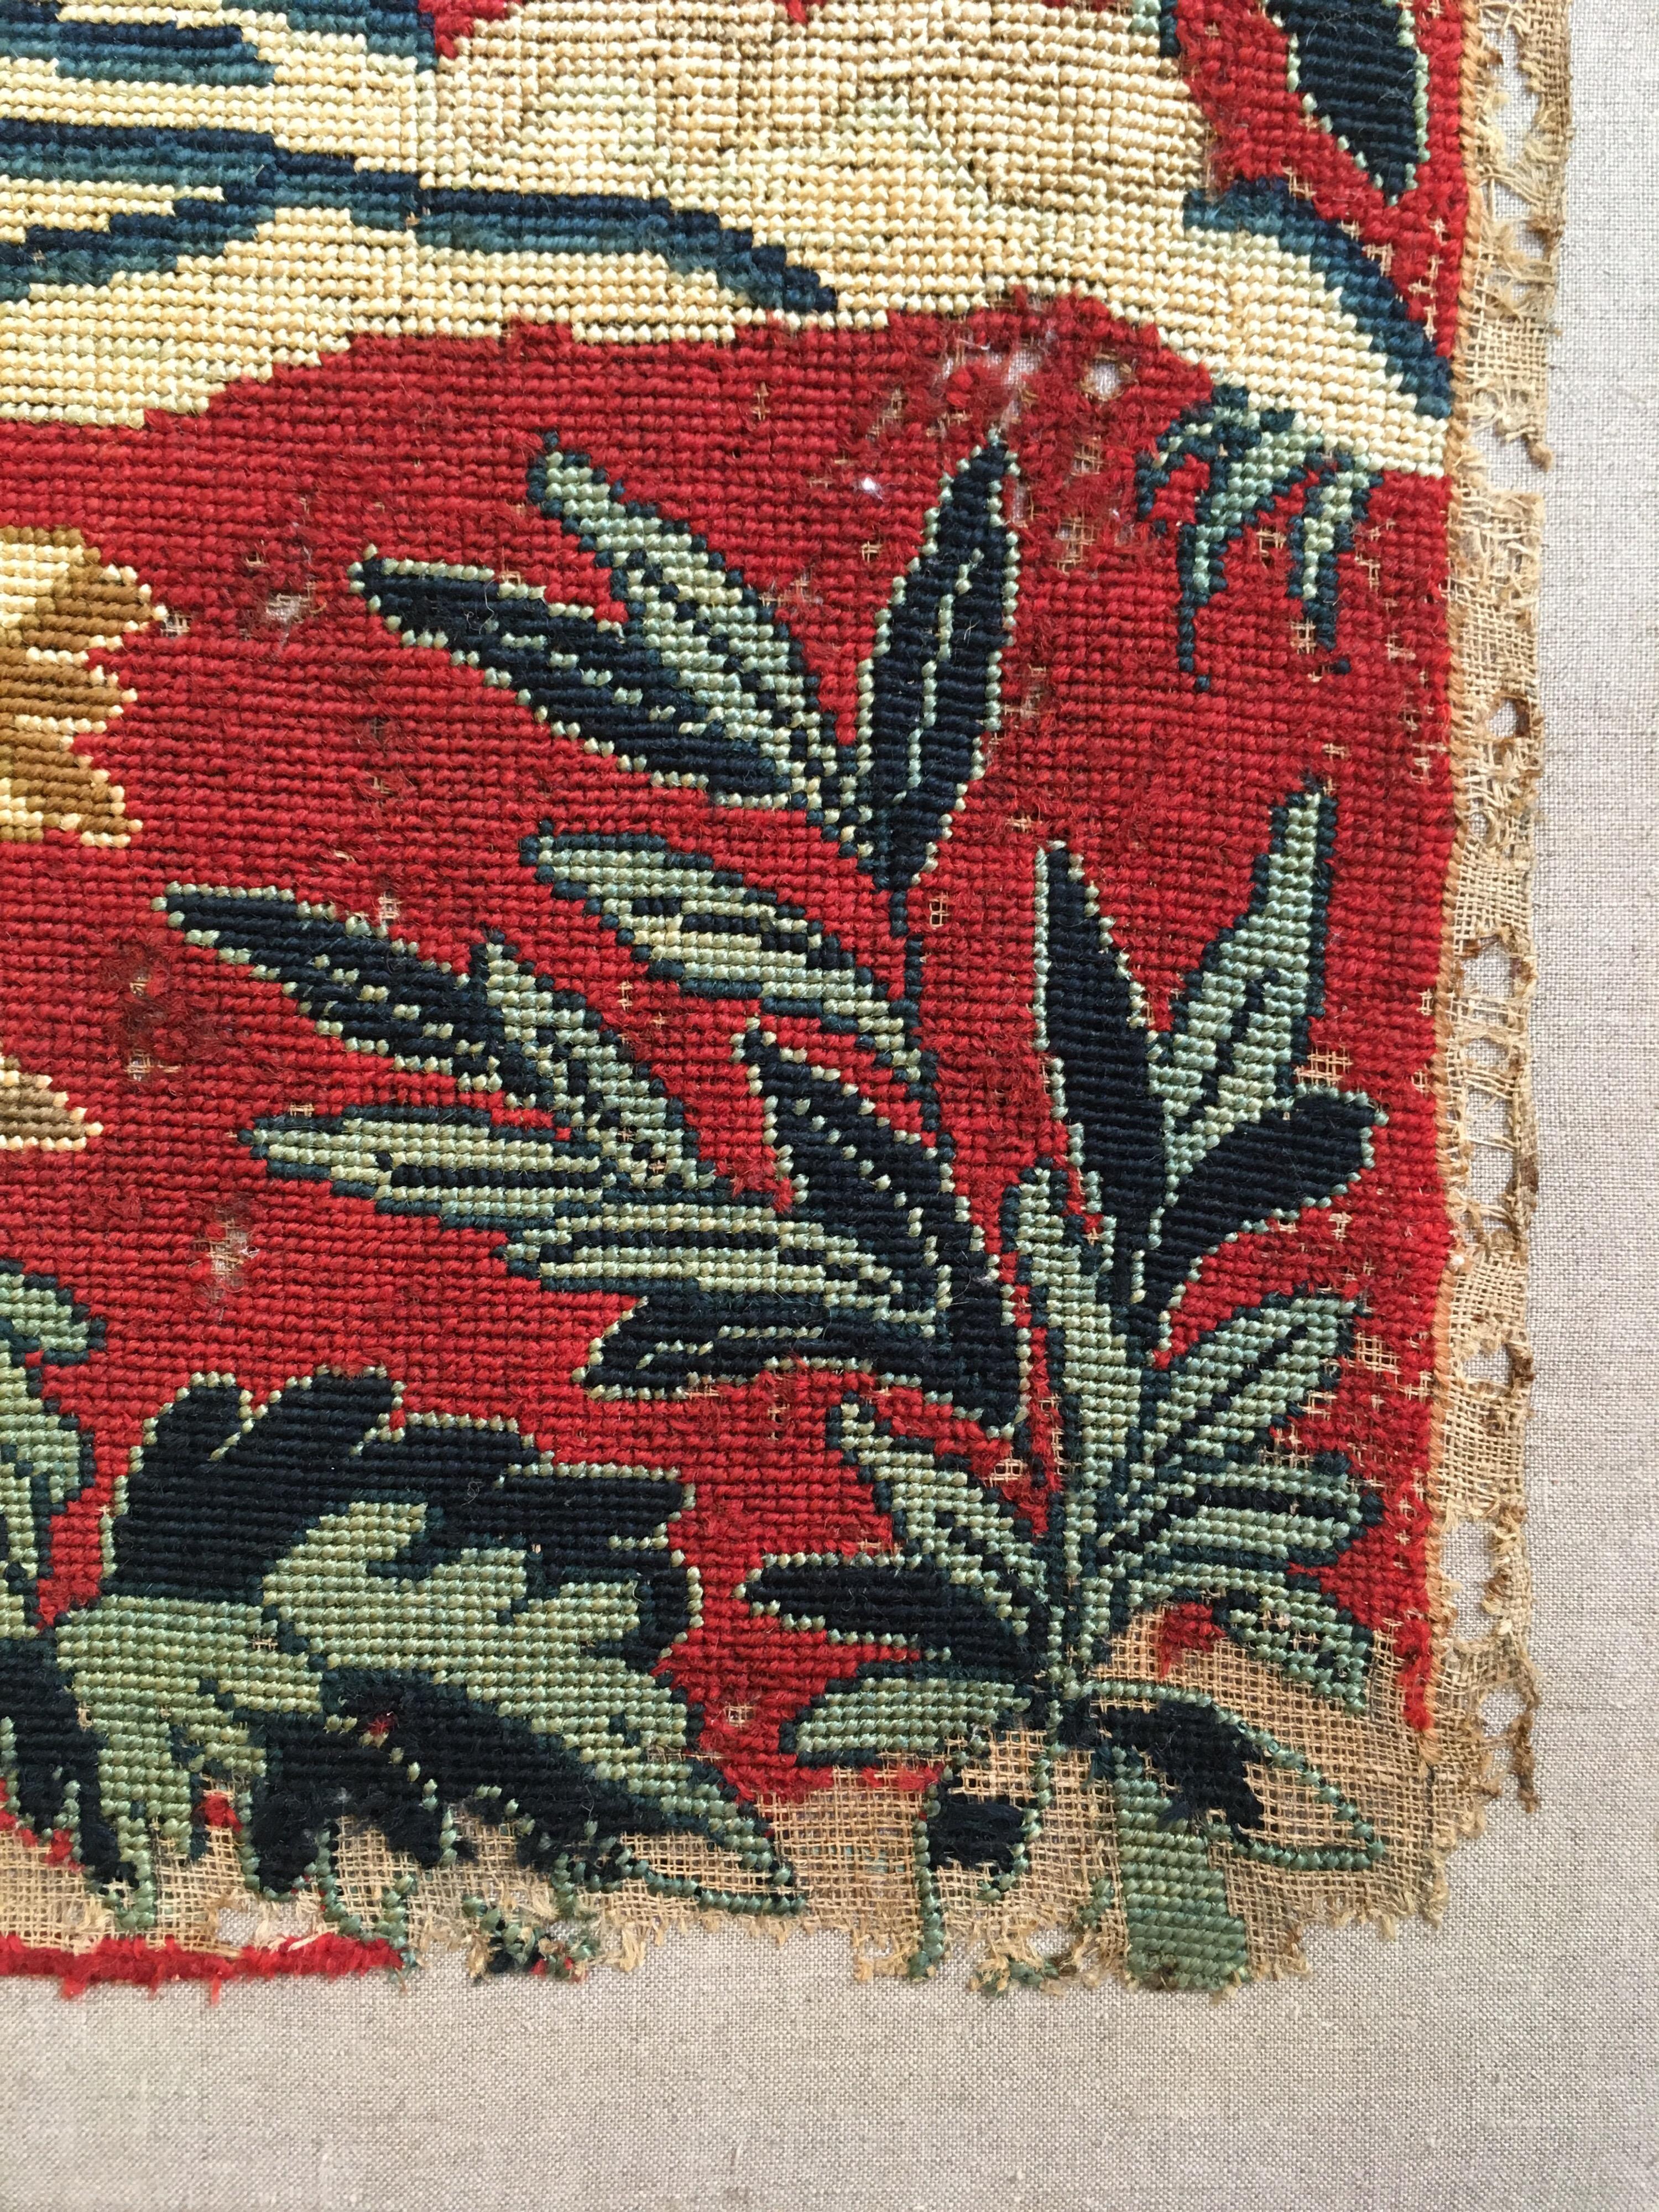 Wool Antique 18th Century French Tapestry Picture with Peacock and Parrot on Red